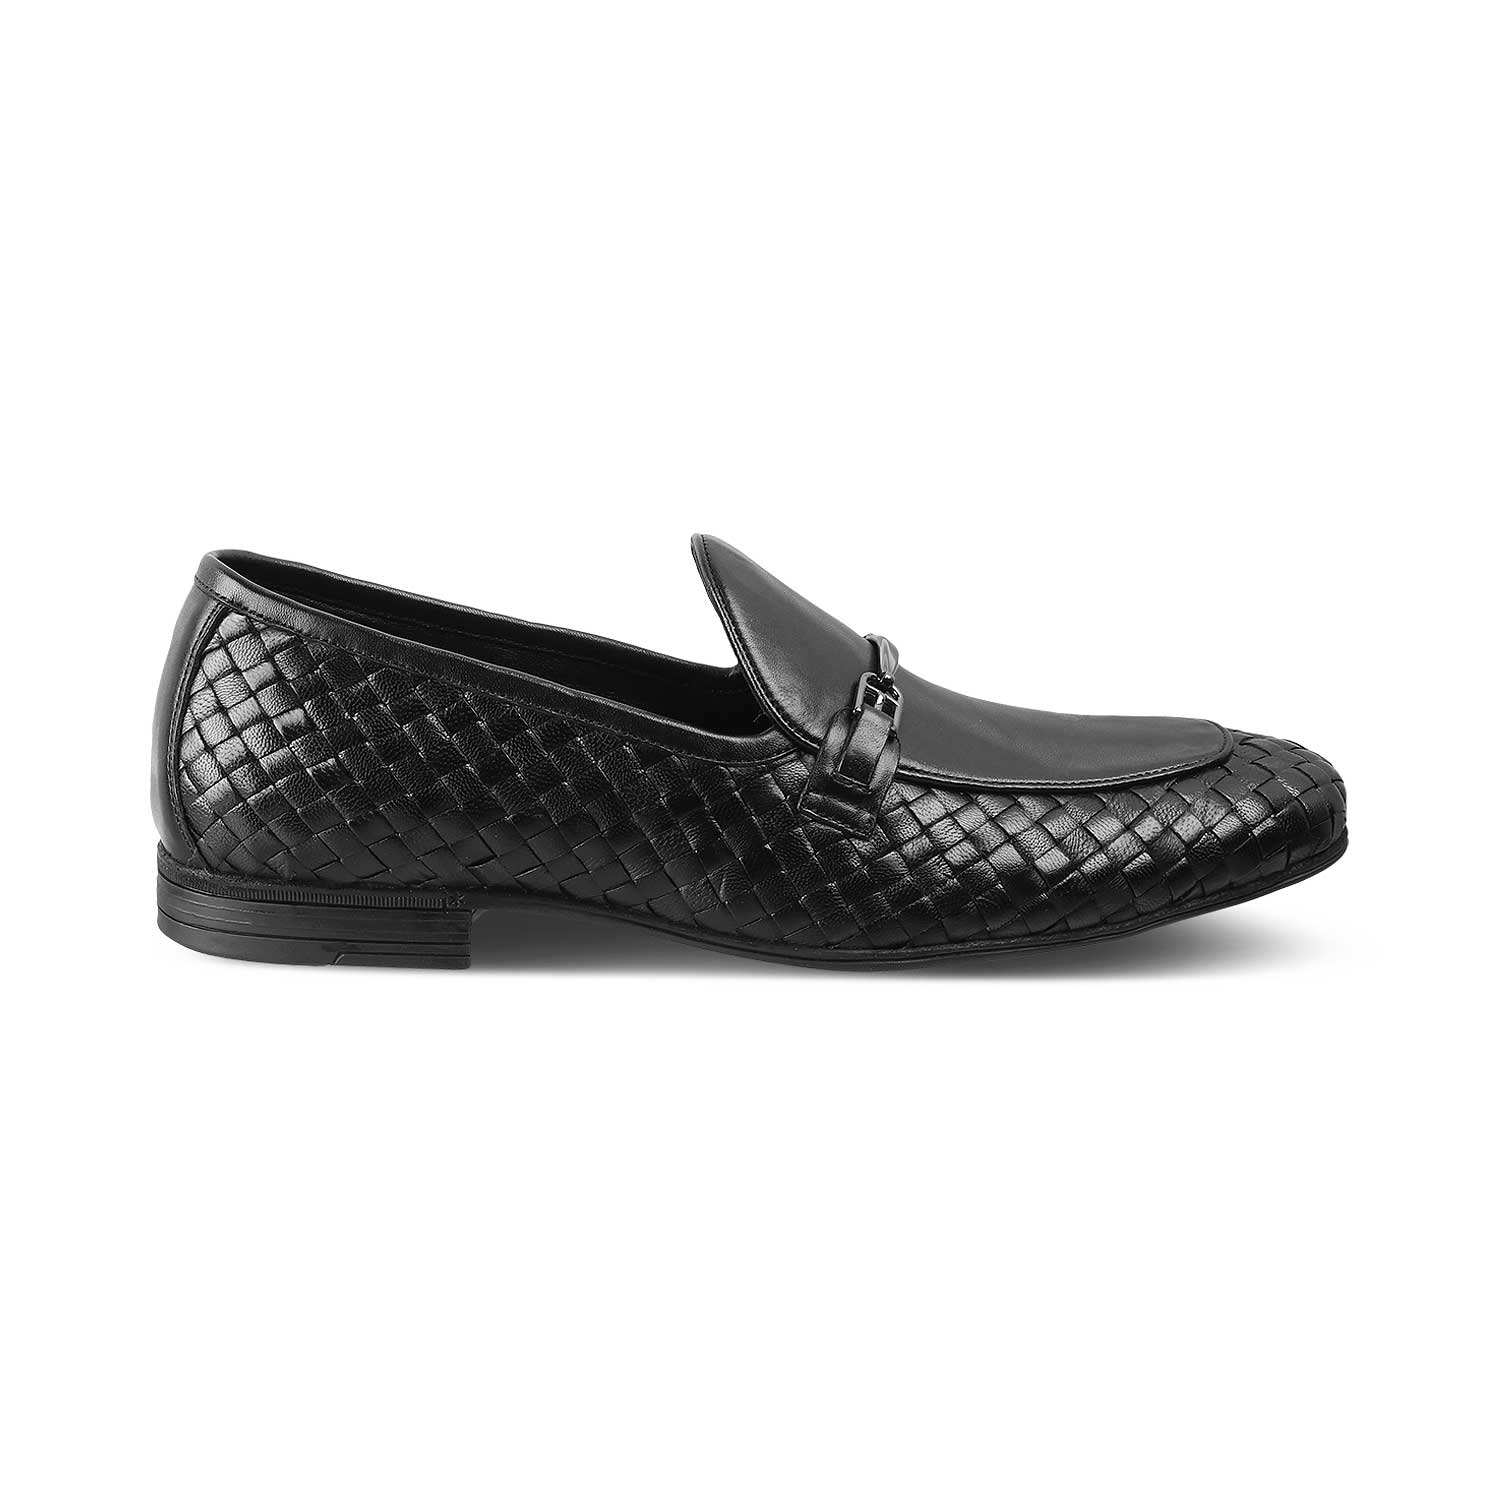 The Somee Black Men's Leather Loafers Online at Tresmode.com